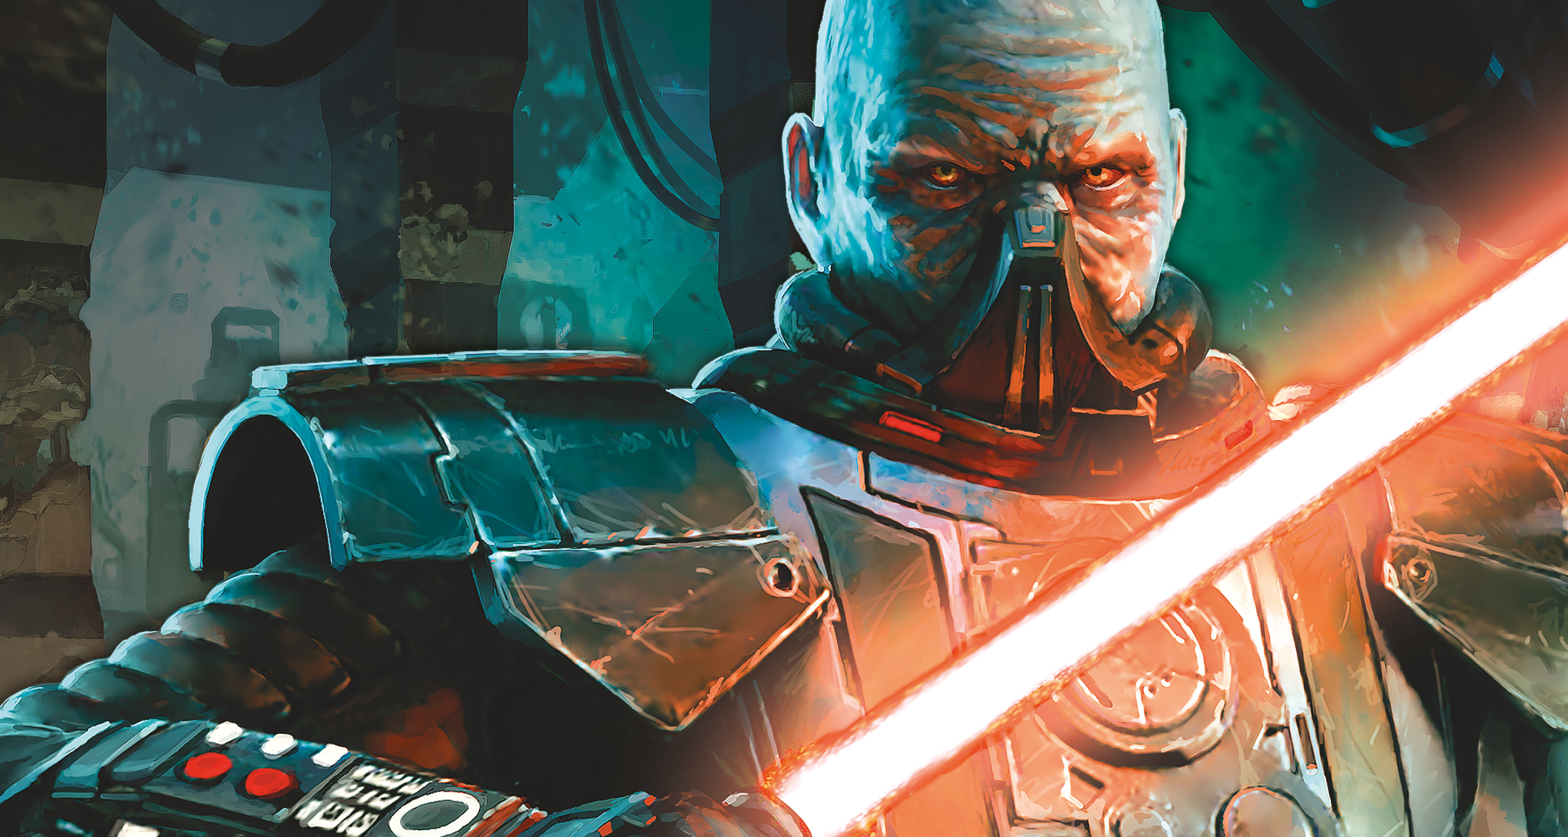 Return to a time of Sith Empires and Old Republics with this familiar Star Wars gaming face. (Image: Marek Oko/Titan Comics)